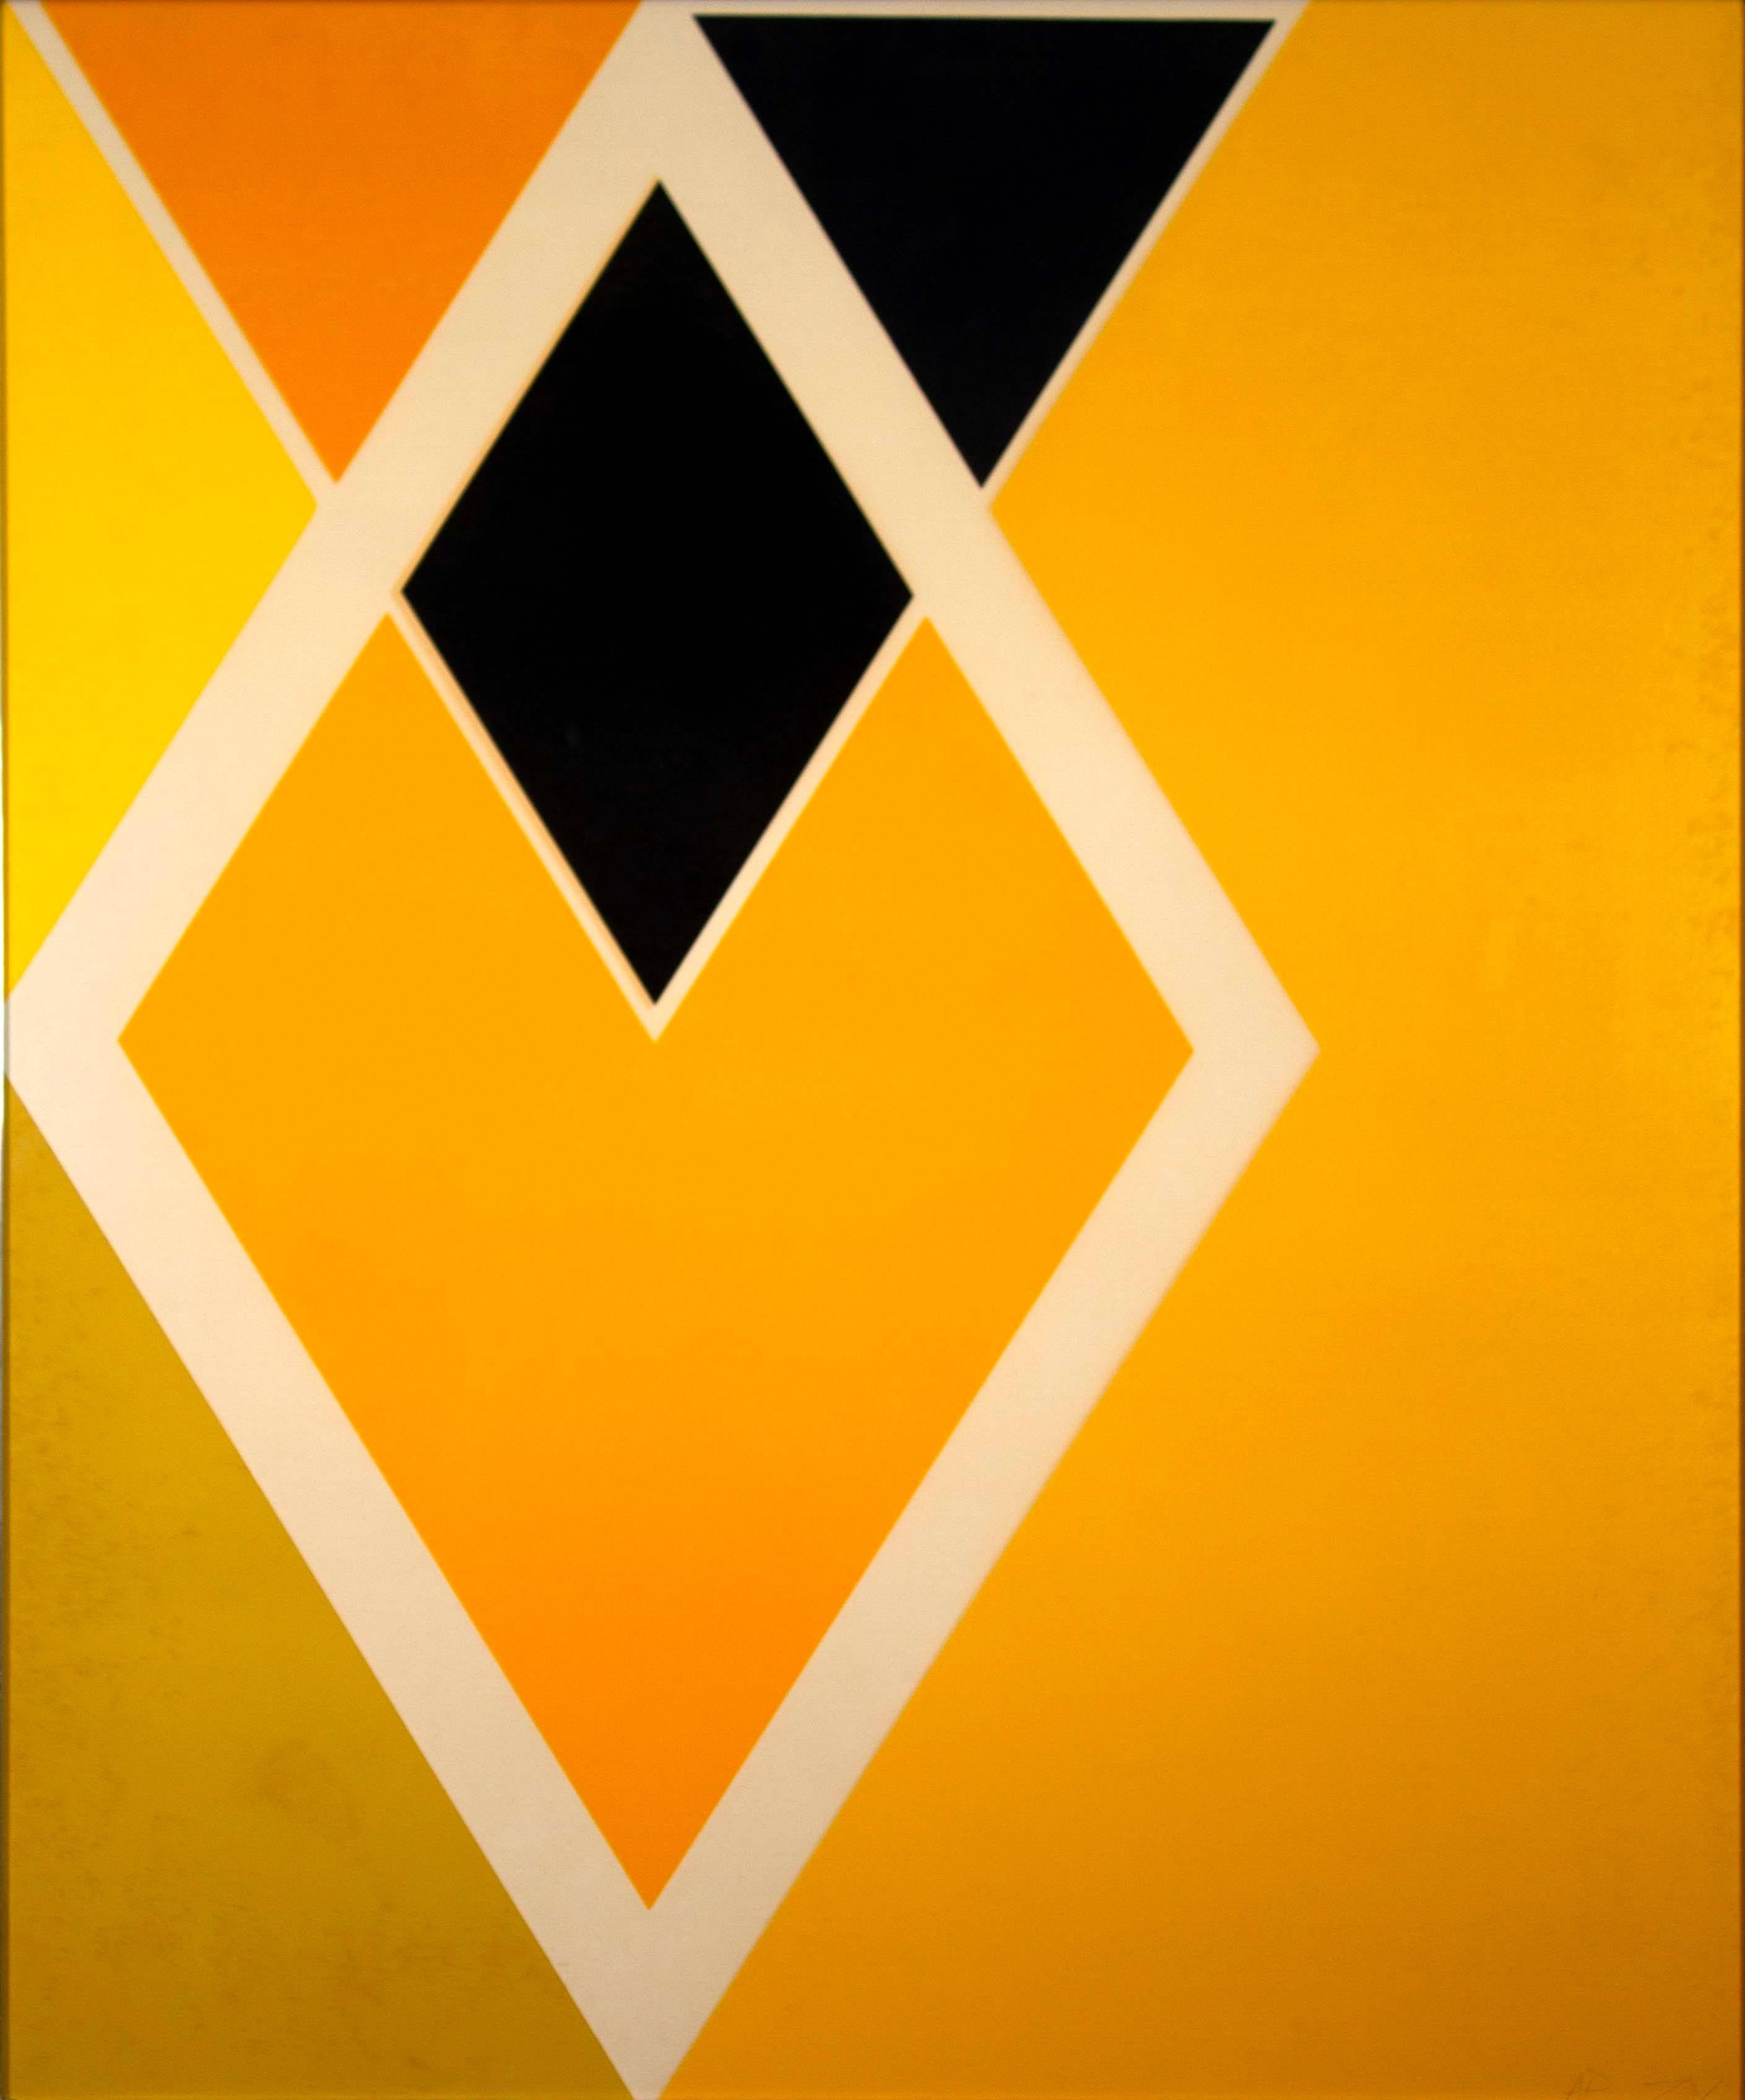 A minimal geometric serigraph on paper titled “Diamond Drill (Yellow, Black, & White)” by Larry Zox. Hand signed in pencil bottom right and annotated AP. Published in 1969; purchased in 1972. Original gallery tag from The J L Hudson Gallery on verso